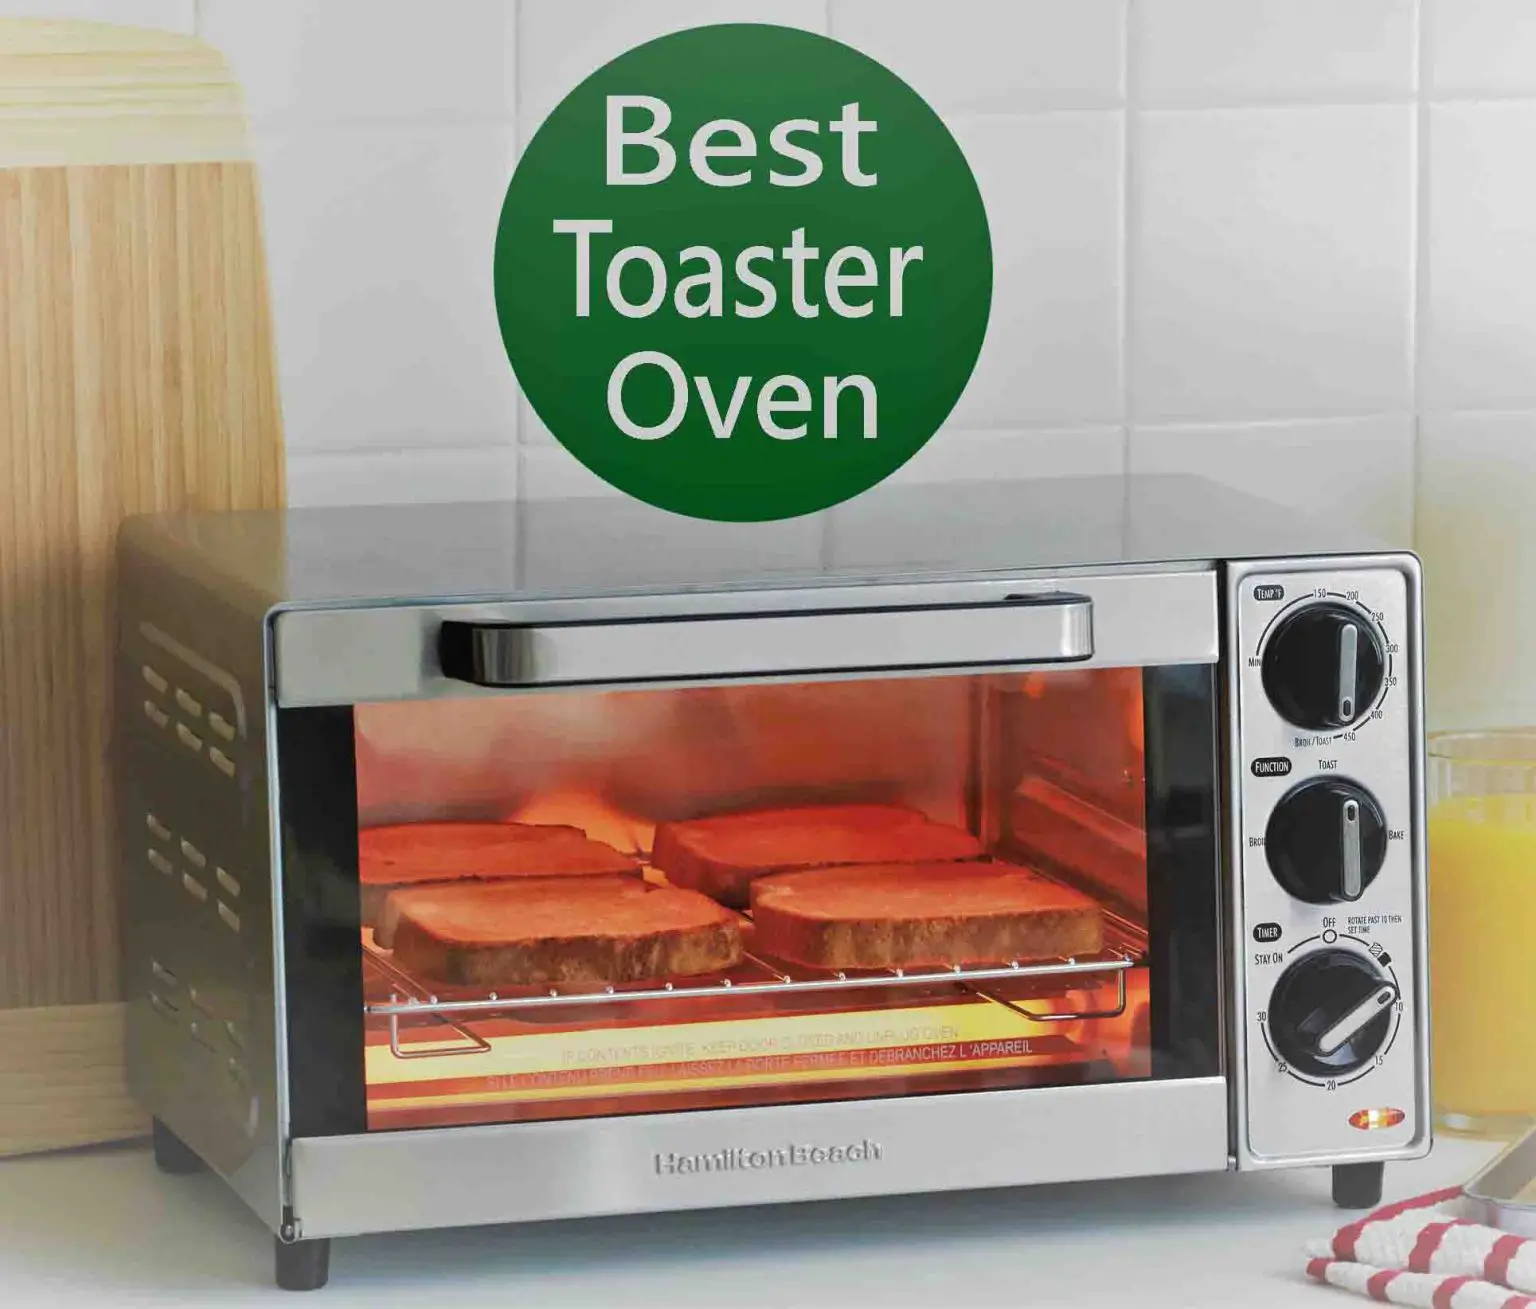 Top 10 Best Toaster Oven Air Fryer Made In USA of 2022